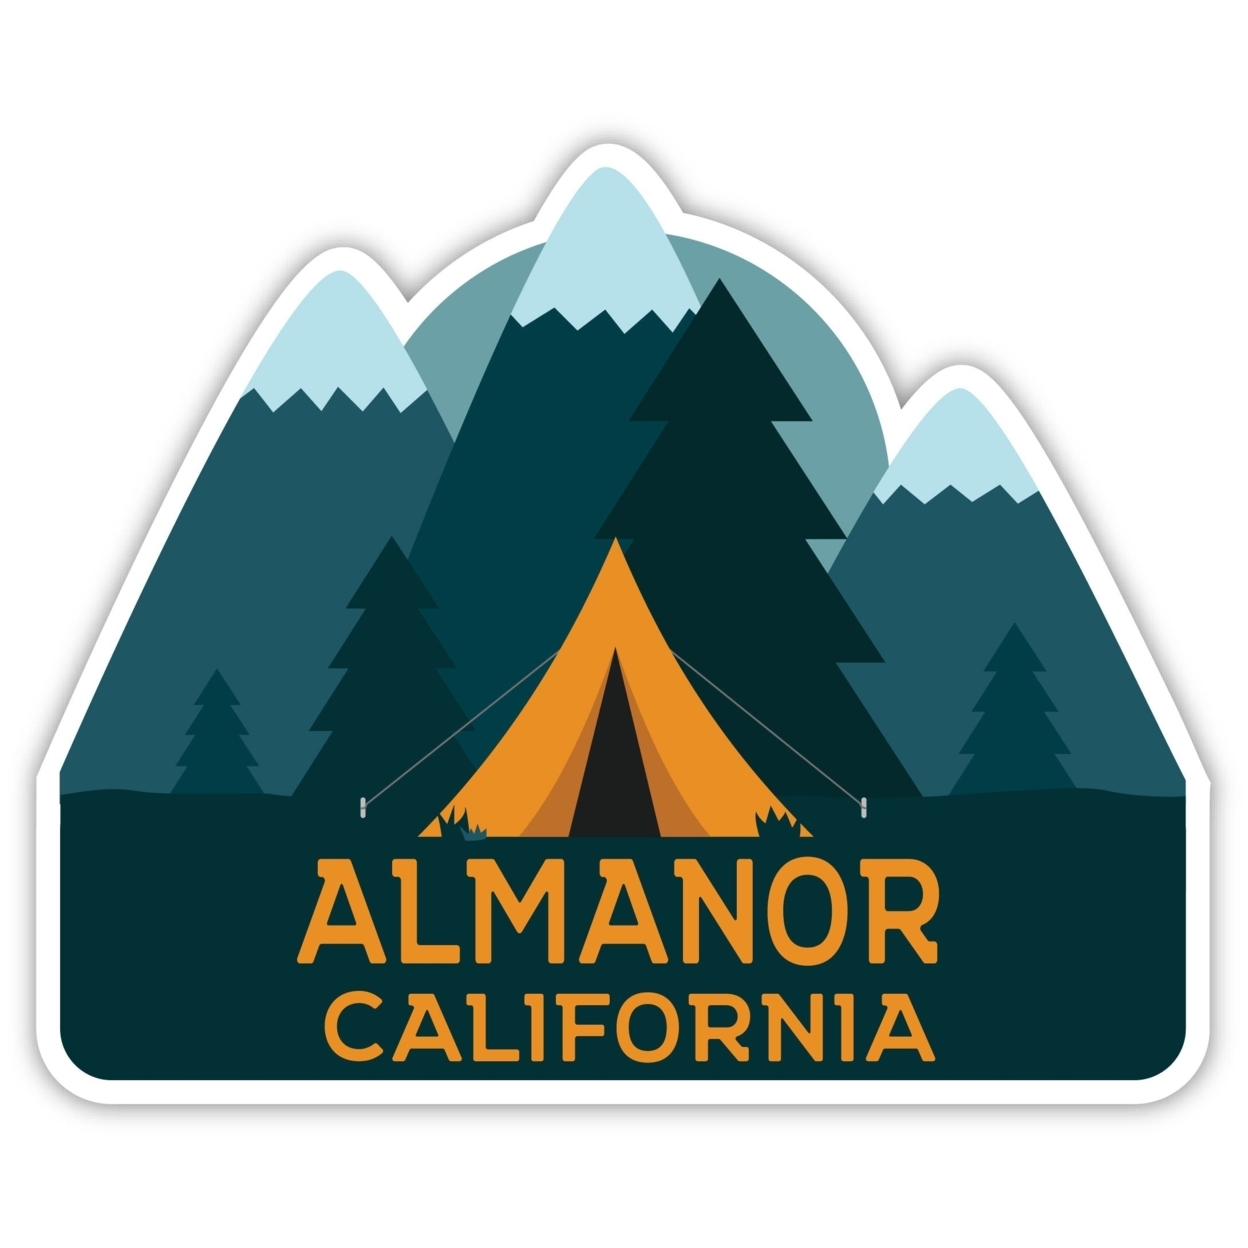 Almanor California Souvenir Decorative Stickers (Choose Theme And Size) - 4-Pack, 6-Inch, Tent